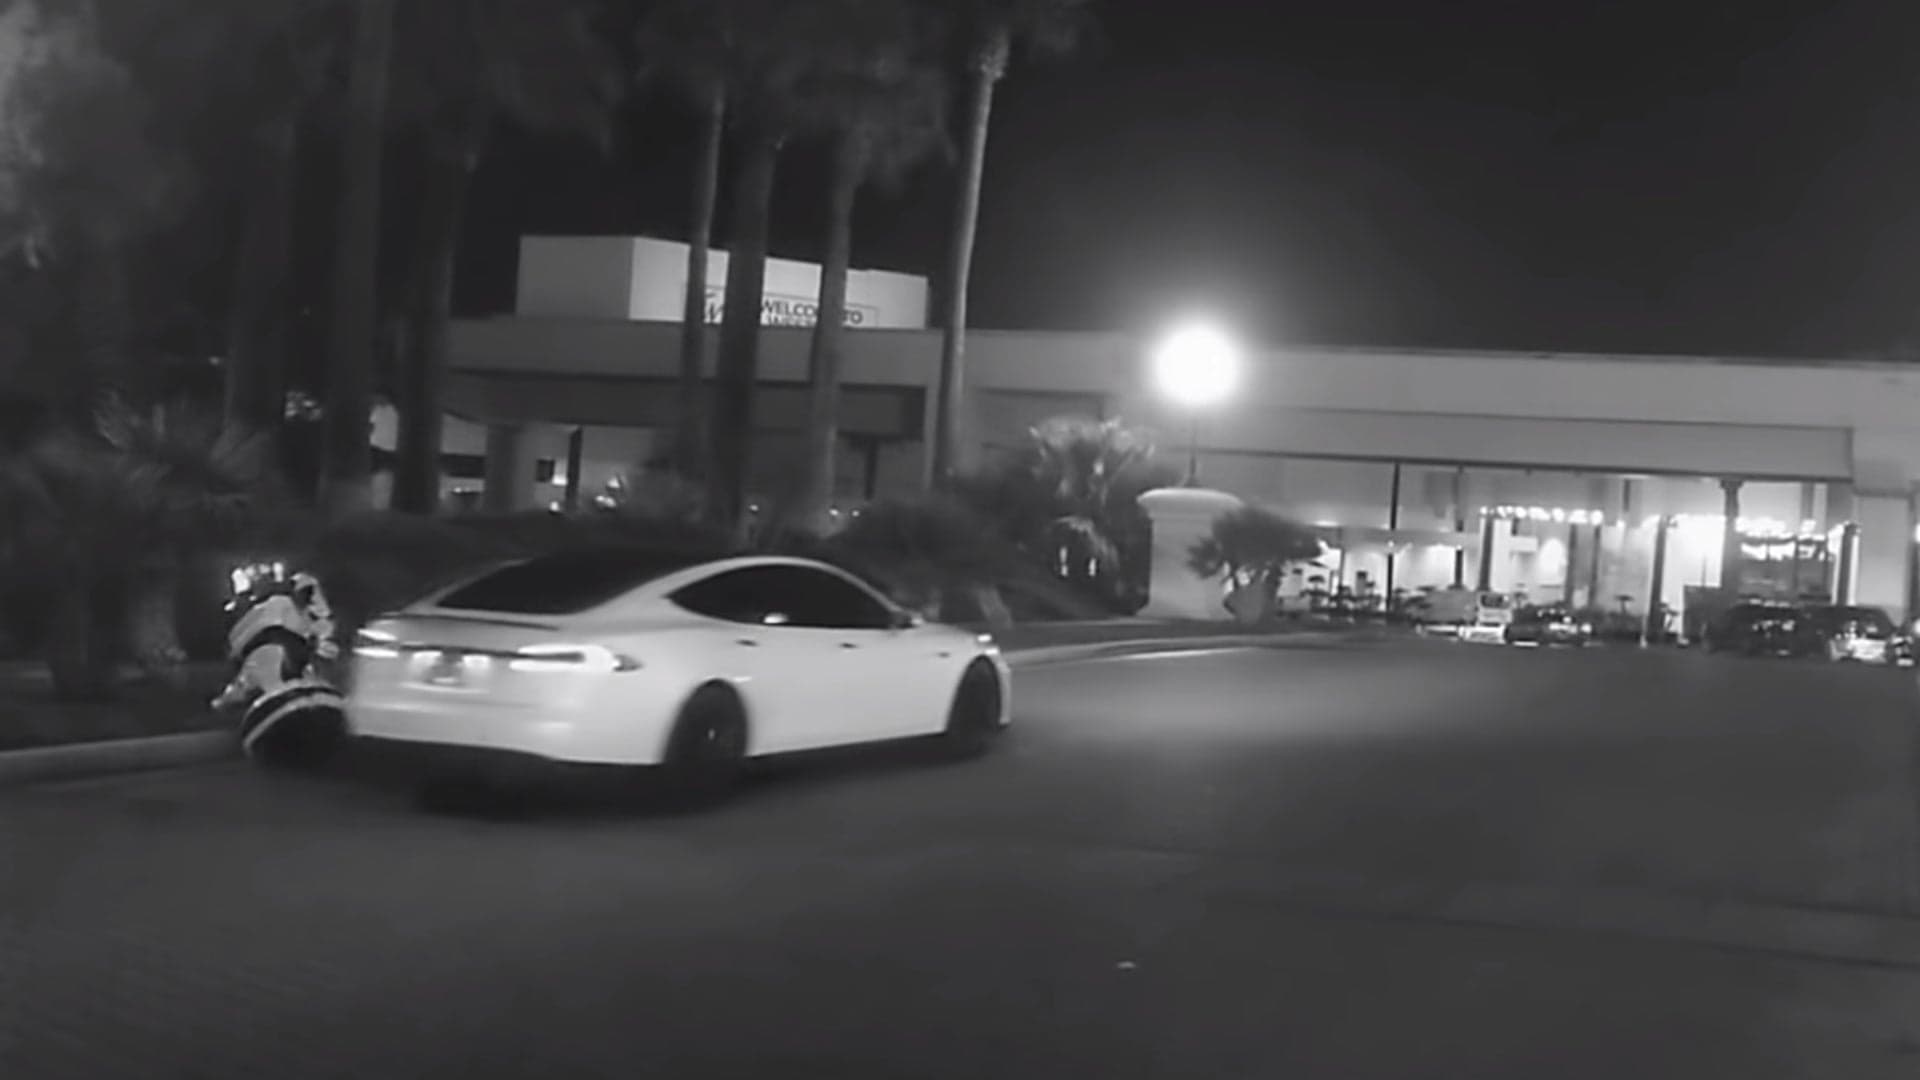 CES 2019: Video of Robot Allegedly Being Run Down By Tesla on Autopilot Looks Too Suspicious